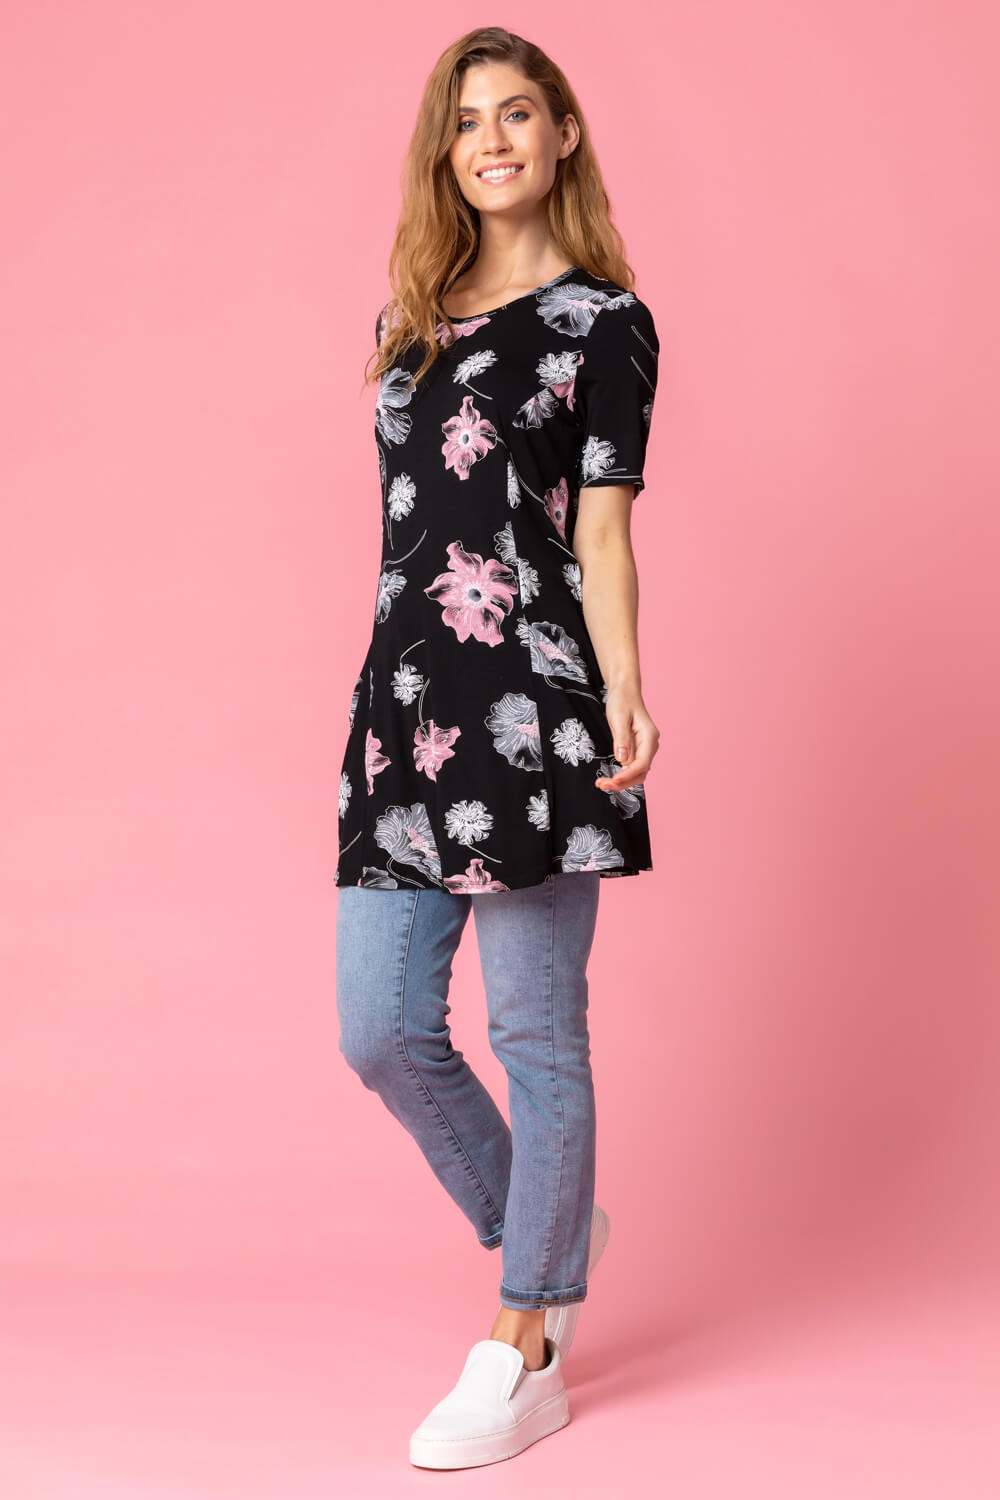 Black Floral Print Swing Tunic Top, Image 3 of 4